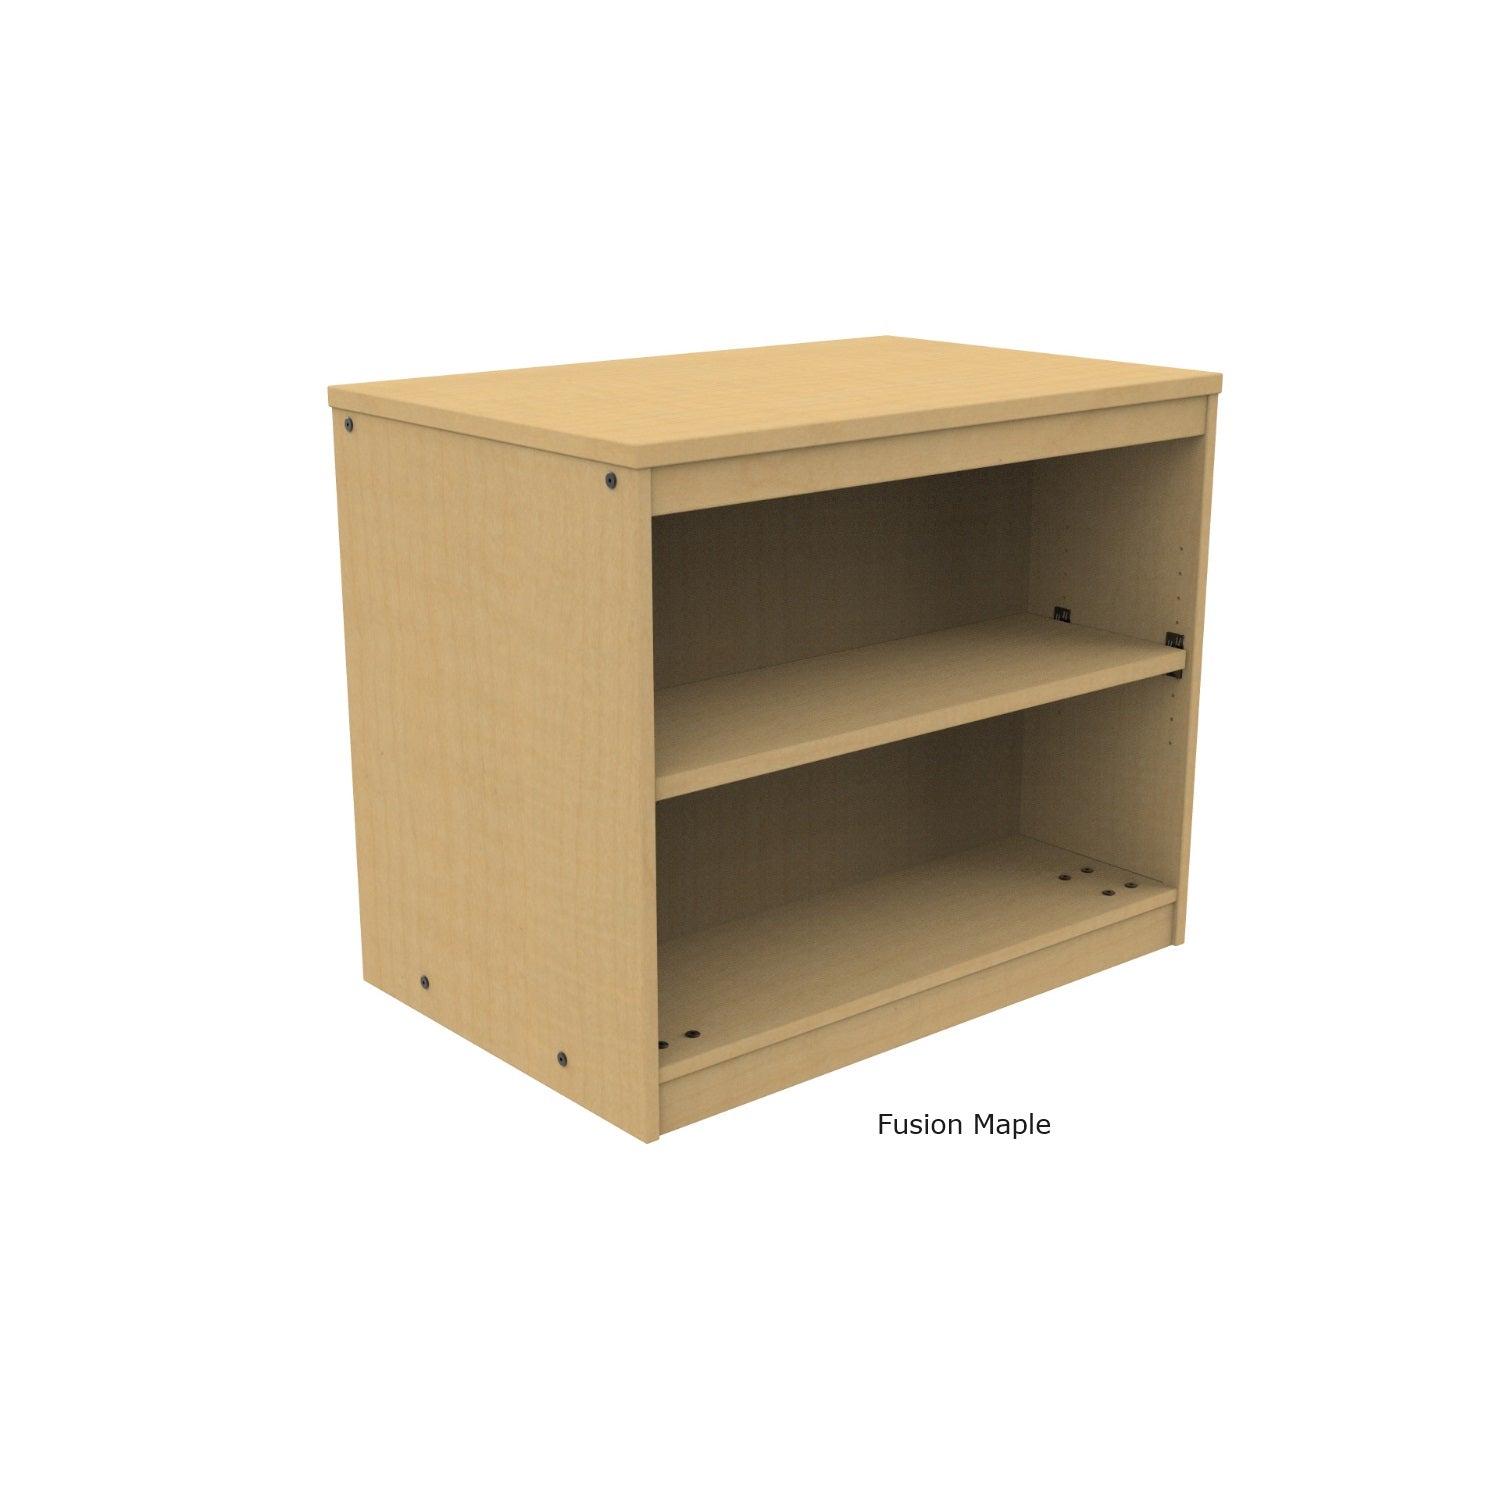 Double Sided 6-Shelf Mobile Bookcase with 2 Adjustable Shelves, 30" High